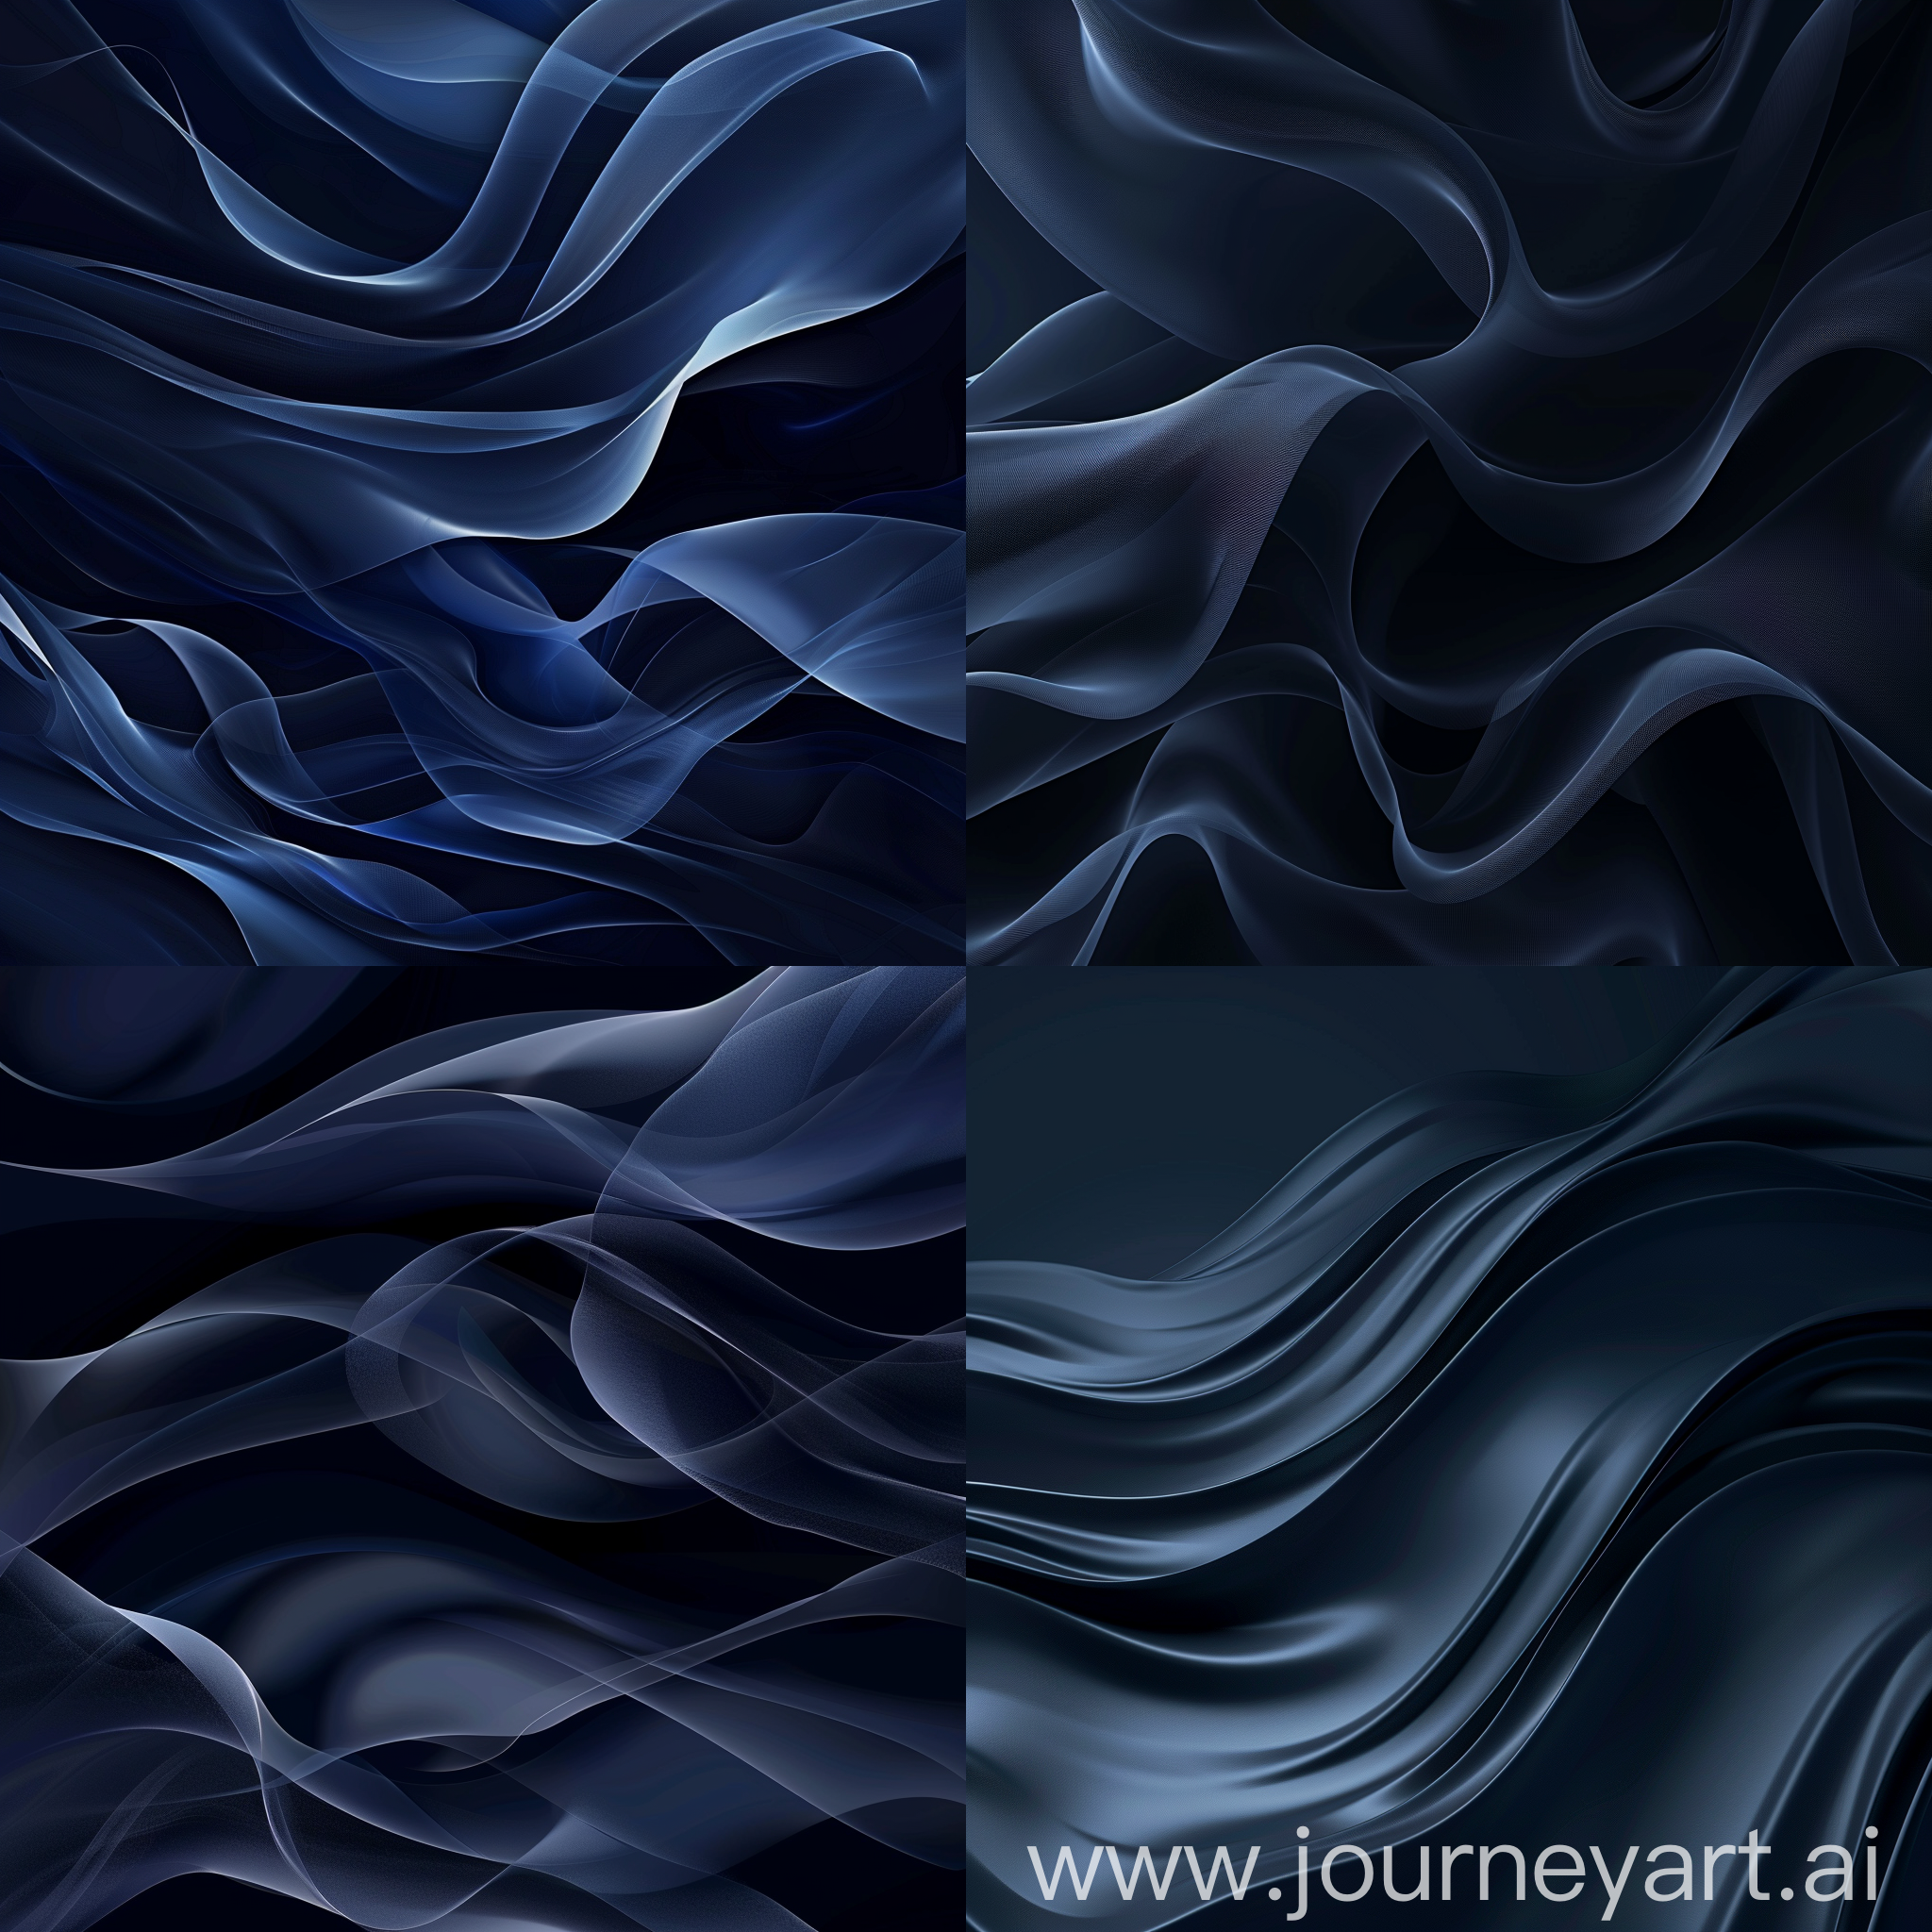 abstract graphic resembling the concept of flowing, with dark blue as predominant color